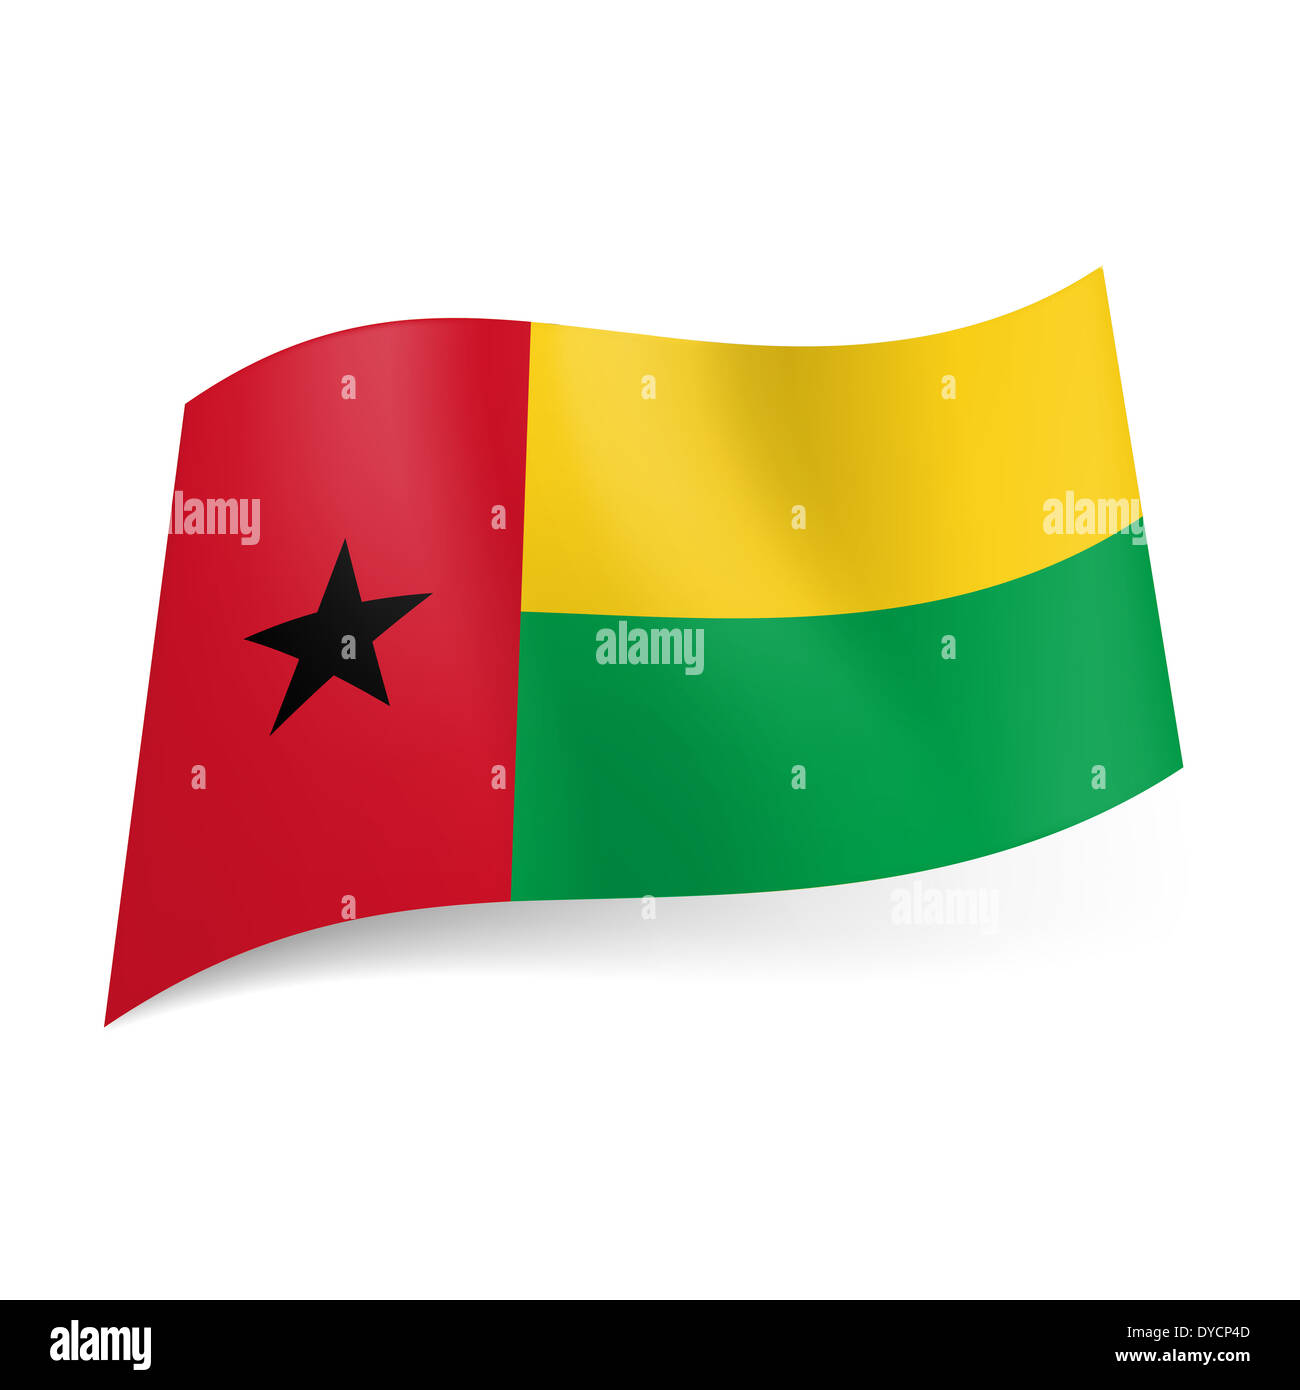 National flag of Guinea: vertical red stripe with black star, yellow and green horizontal stripes Photo - Alamy